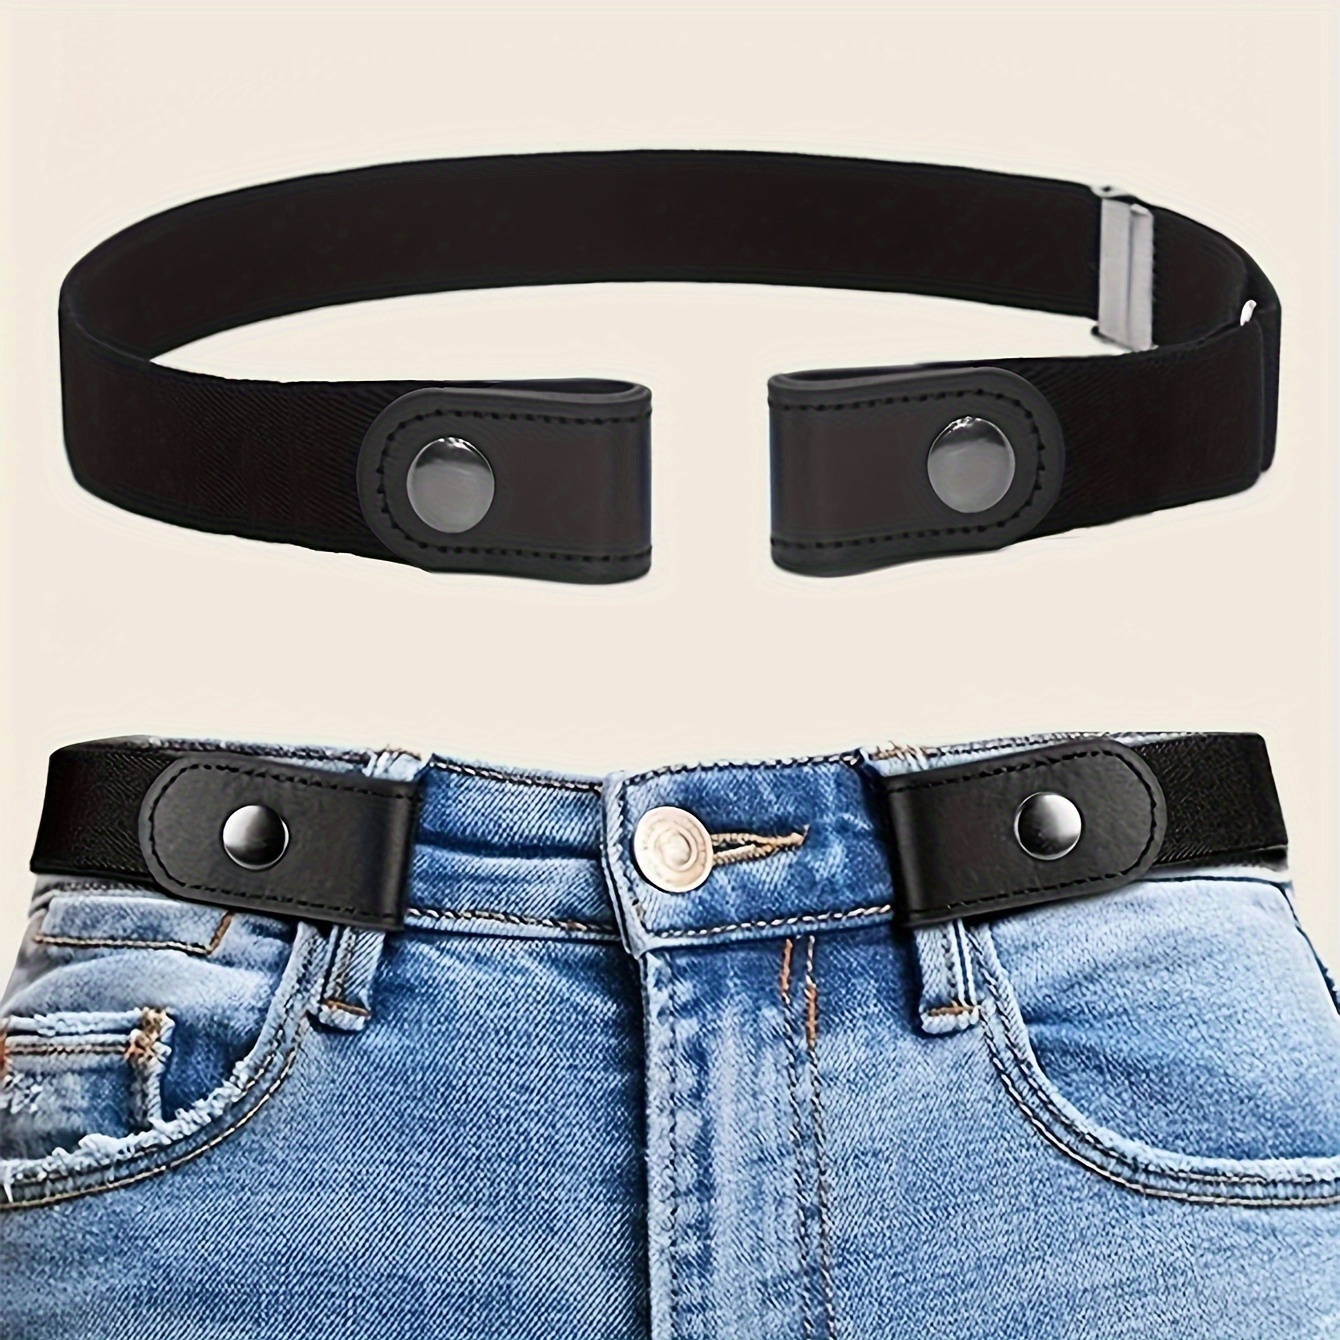 

1 Pc Tummy Control Belt - Elastic Adjustable Waistband For Jeans And Pants - No Buckle Design For Comfort And Convenience